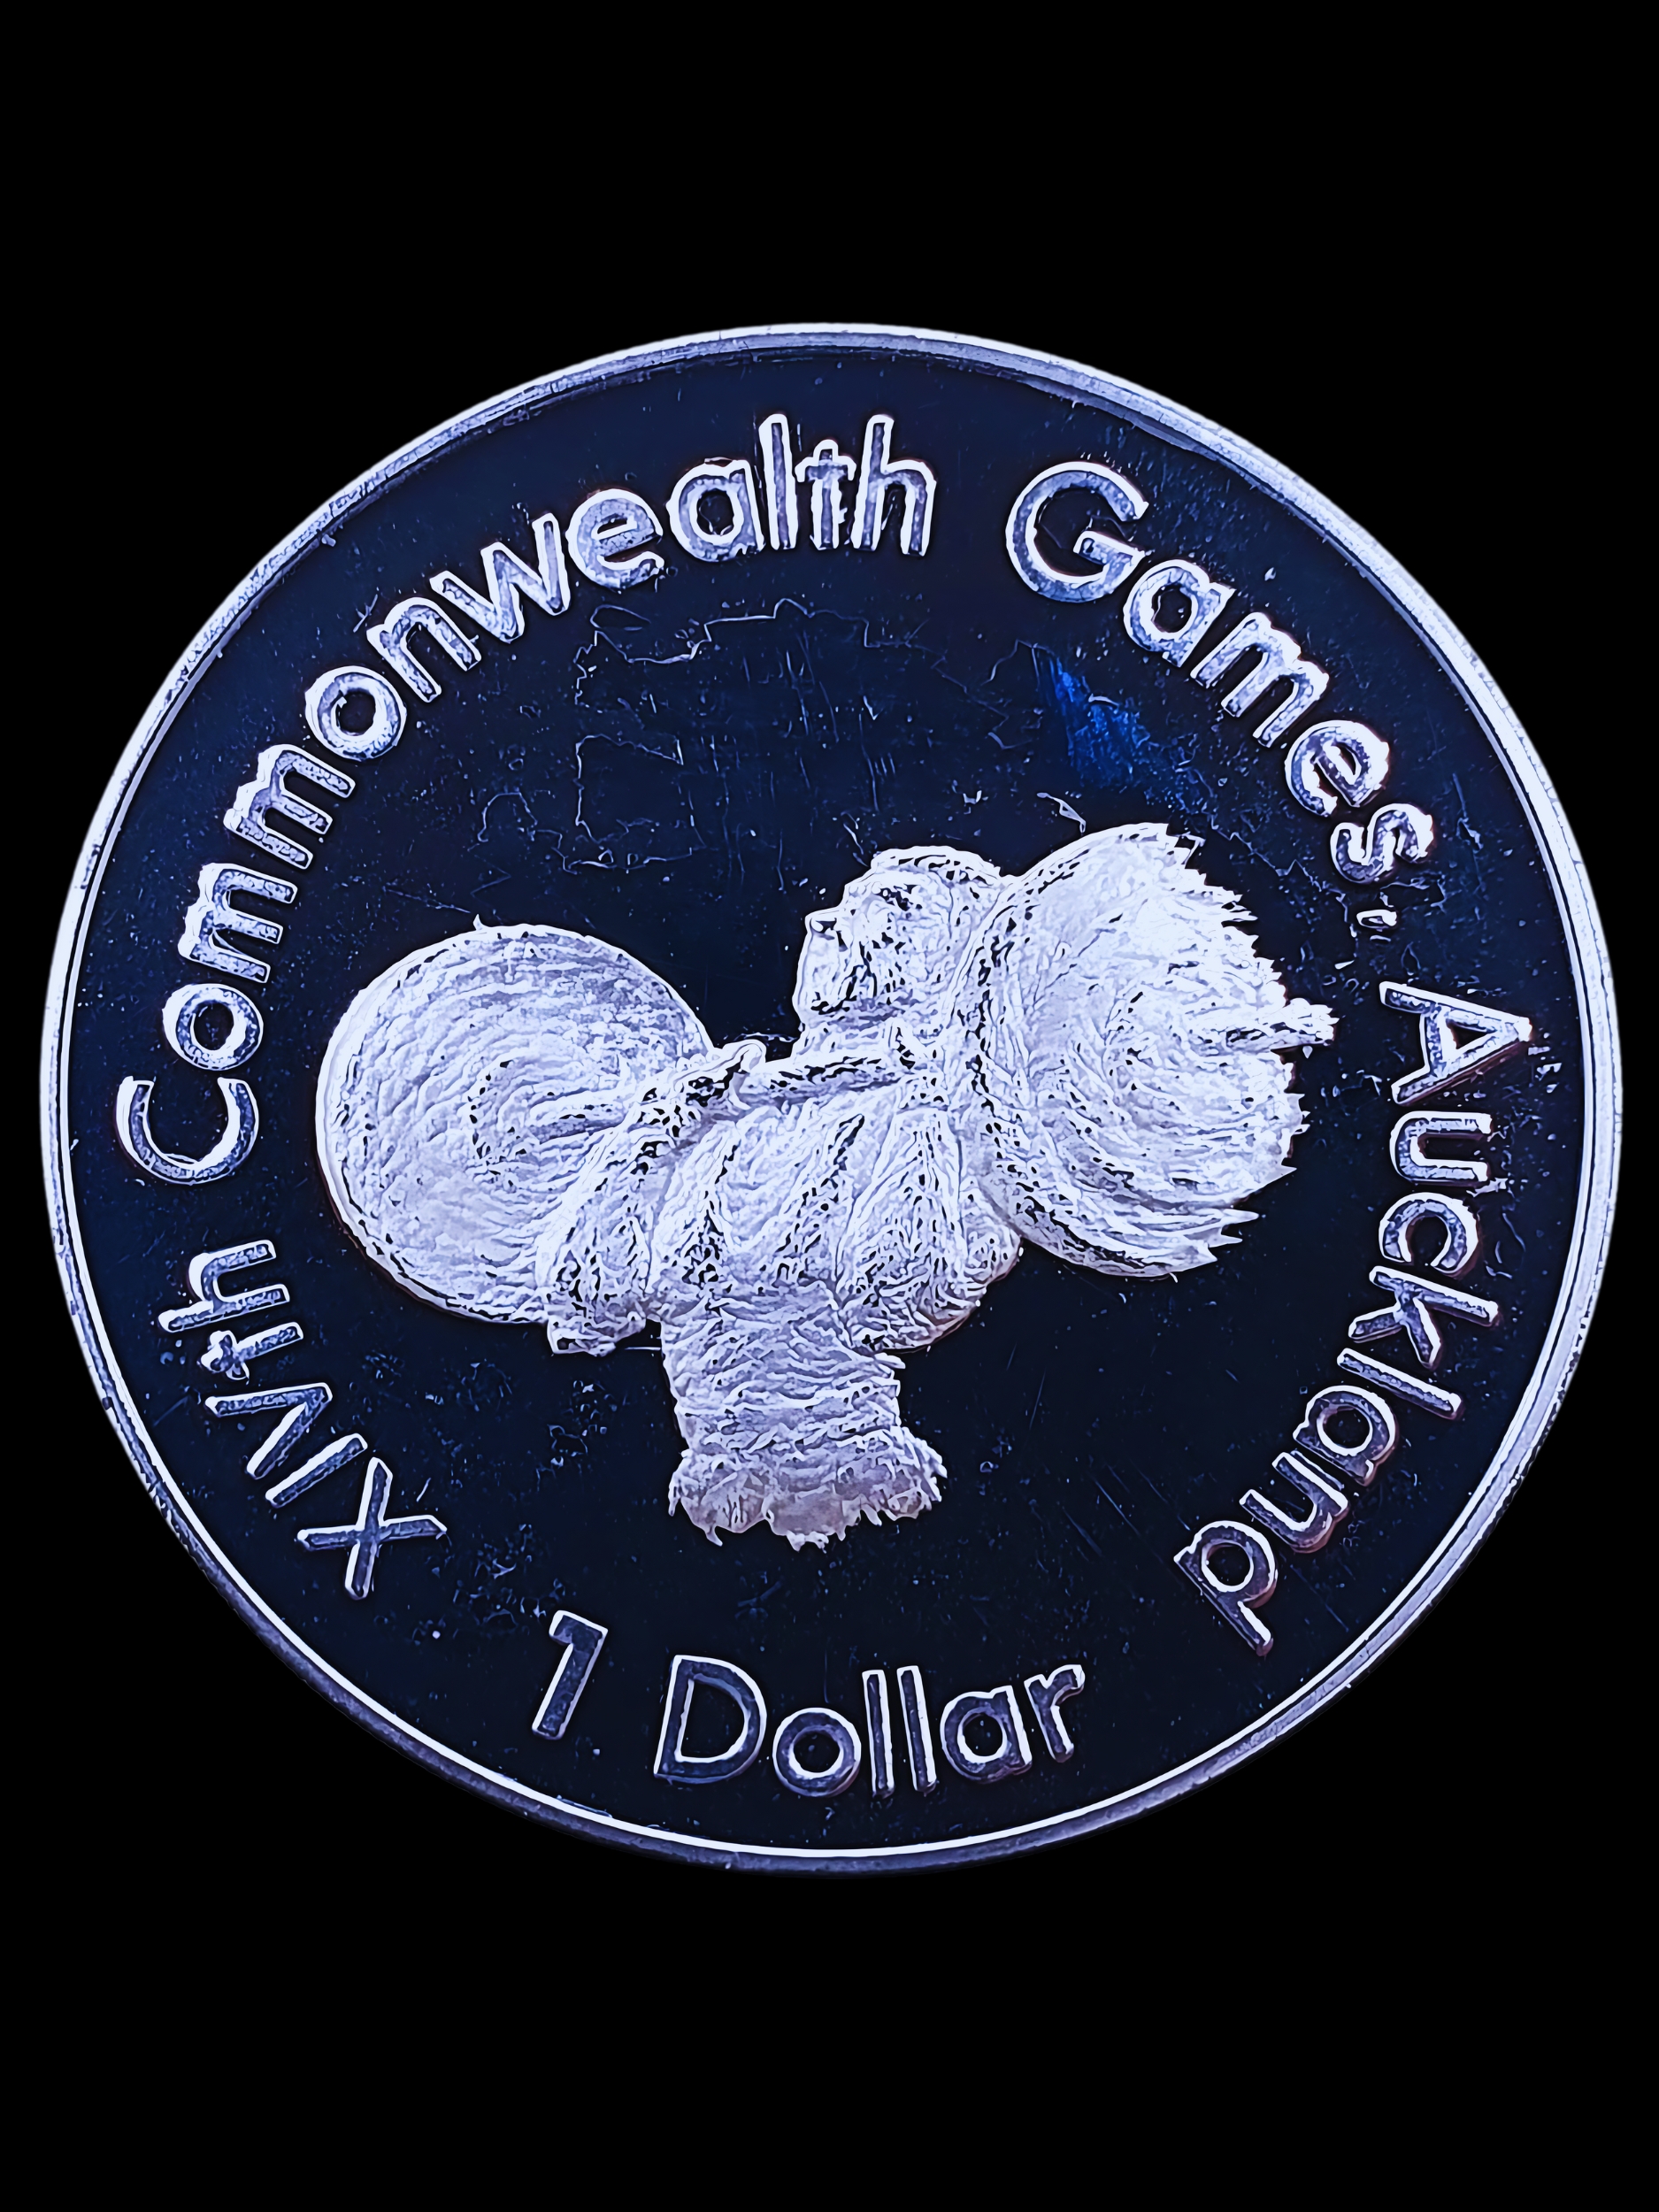 1989 XIVth Common Wealth Games Weightlifter 1 Dollar Silver Coin